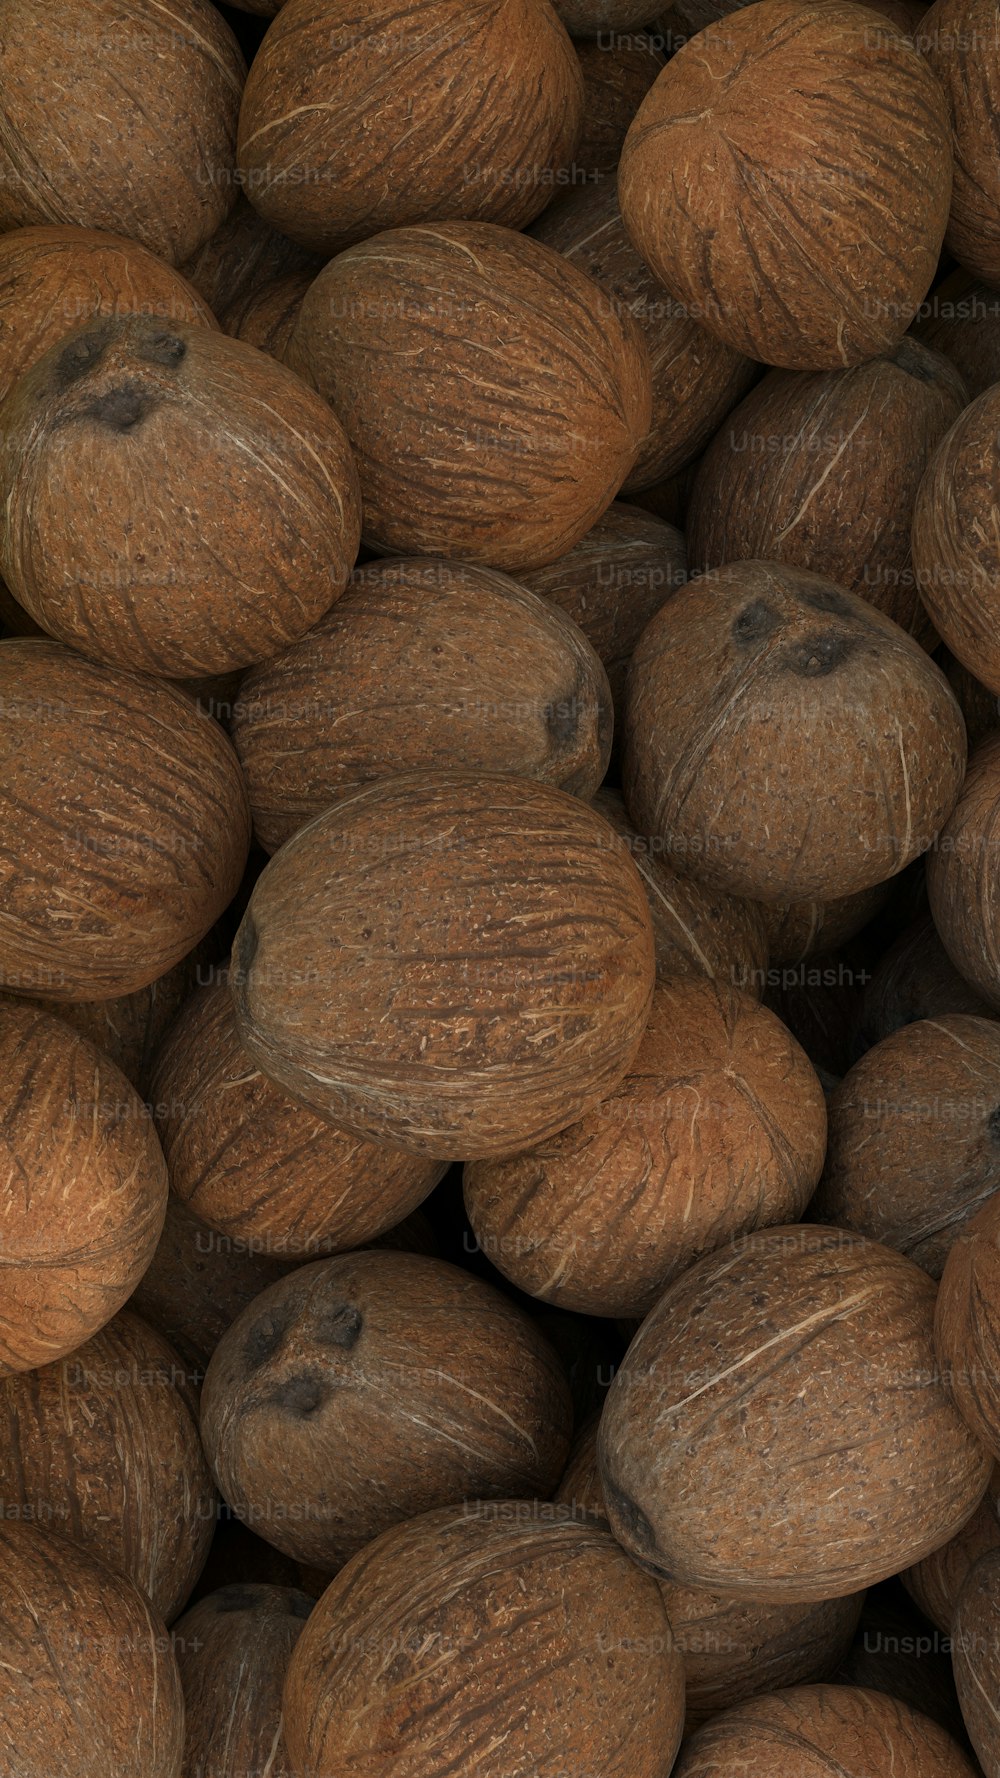 a pile of walnuts sitting on top of each other